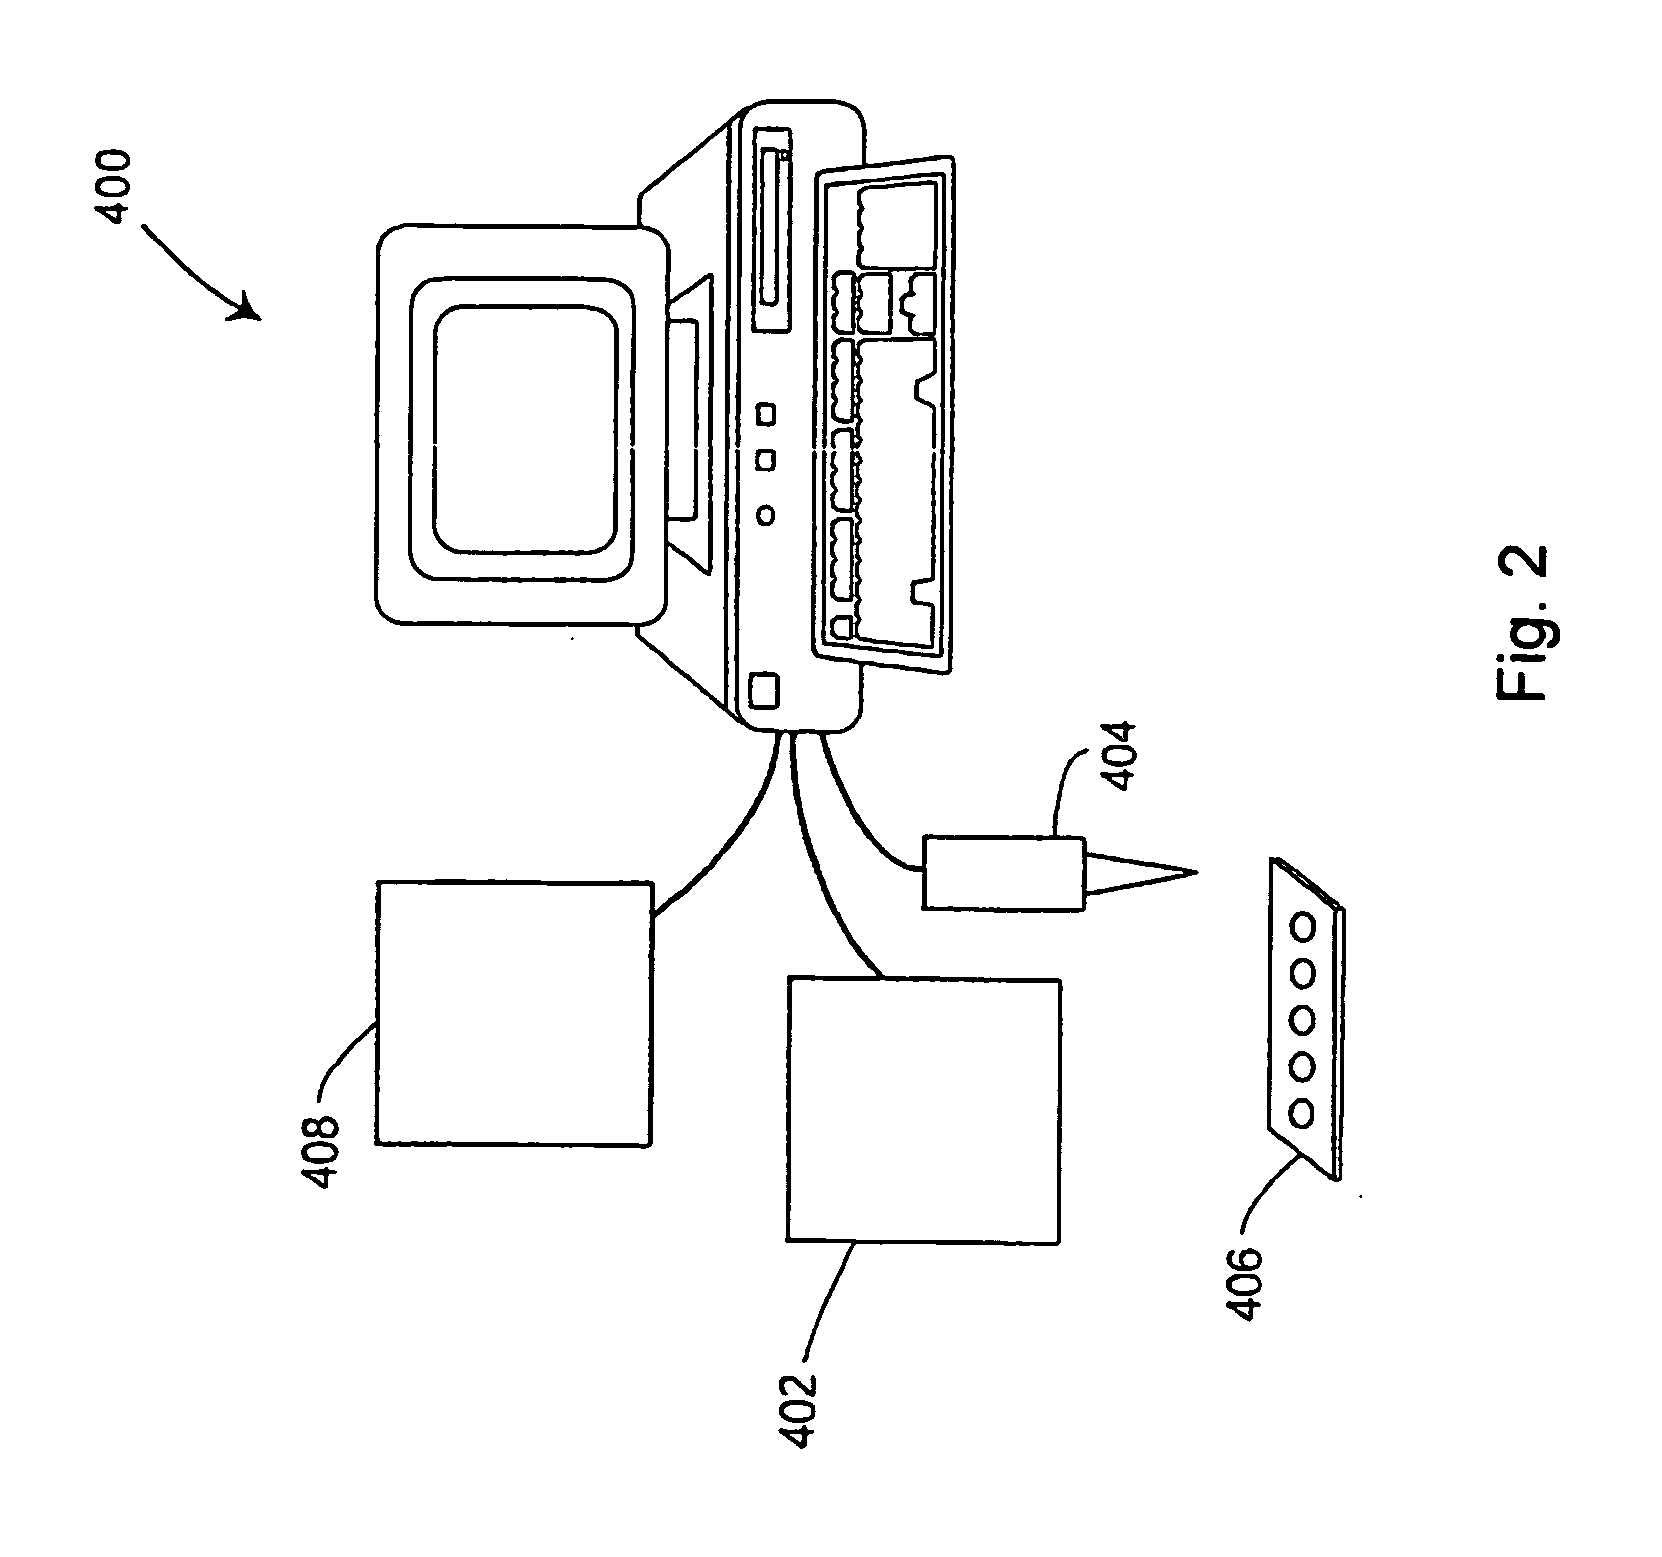 Reagents and Methods for Detecting Severe Acute Respiratory Syndrome Coronavirus